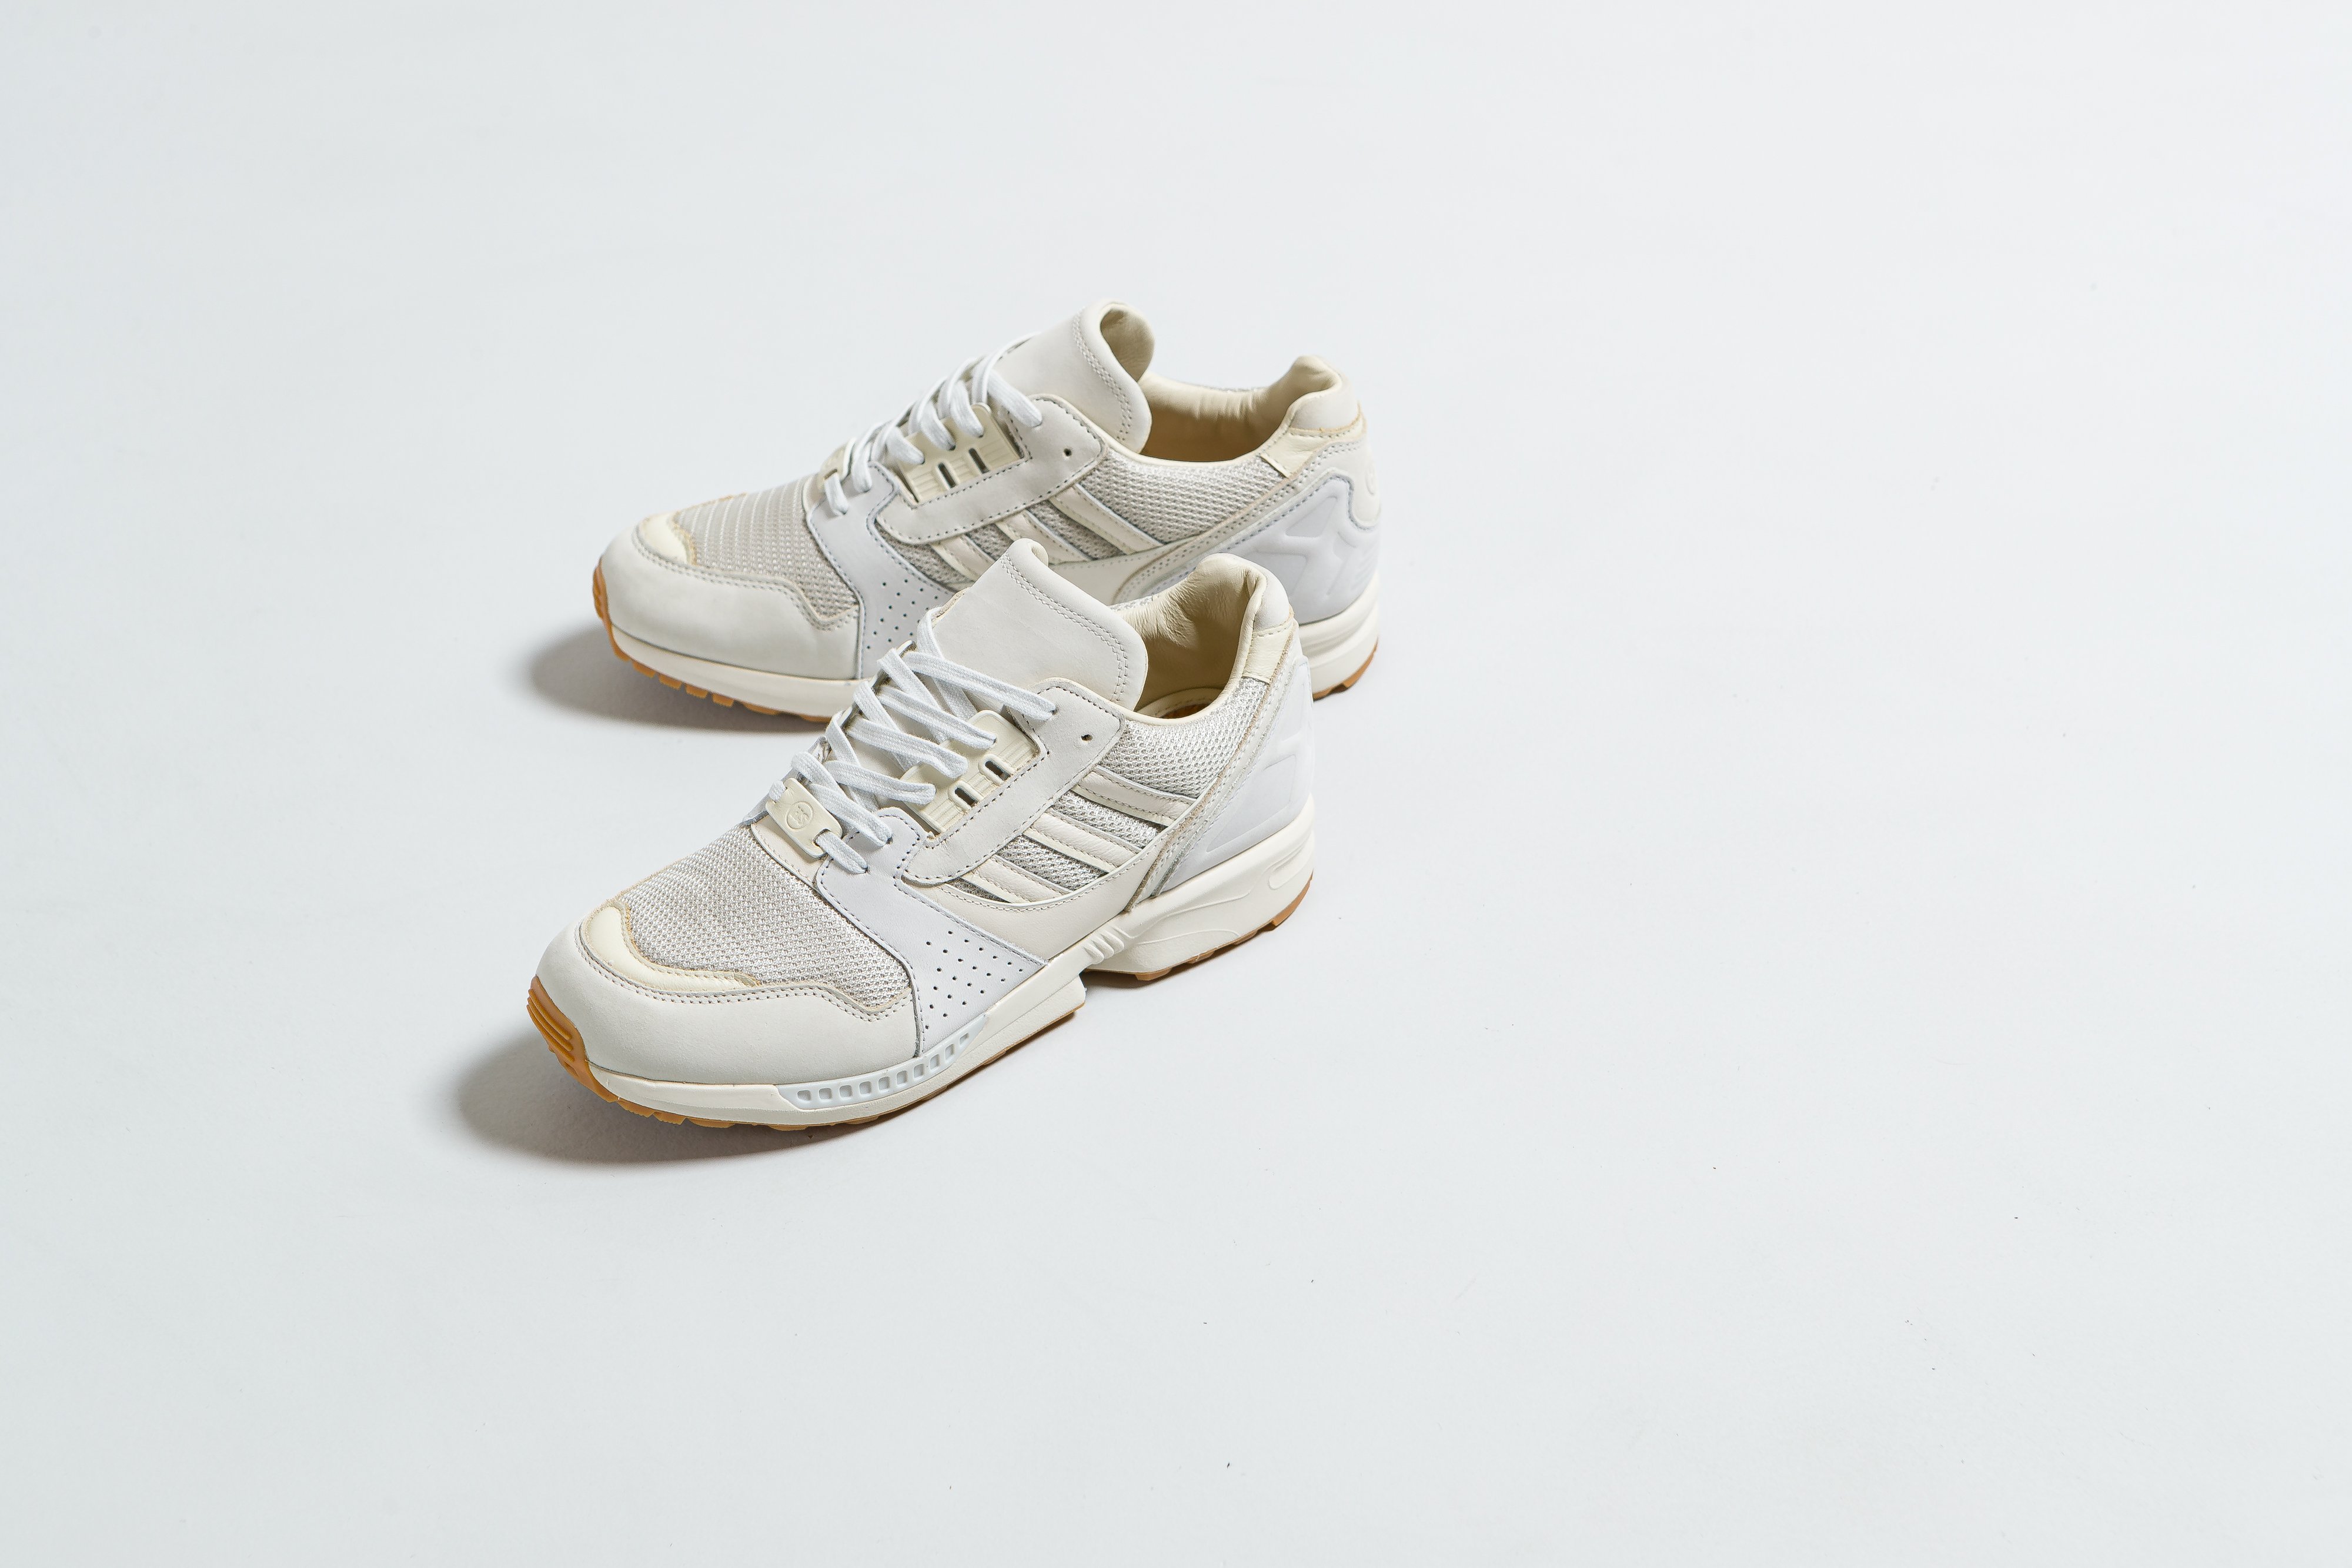 Up There Store - adidas Originals A-ZX High Snobiety Q is for Qualitat (Quality)